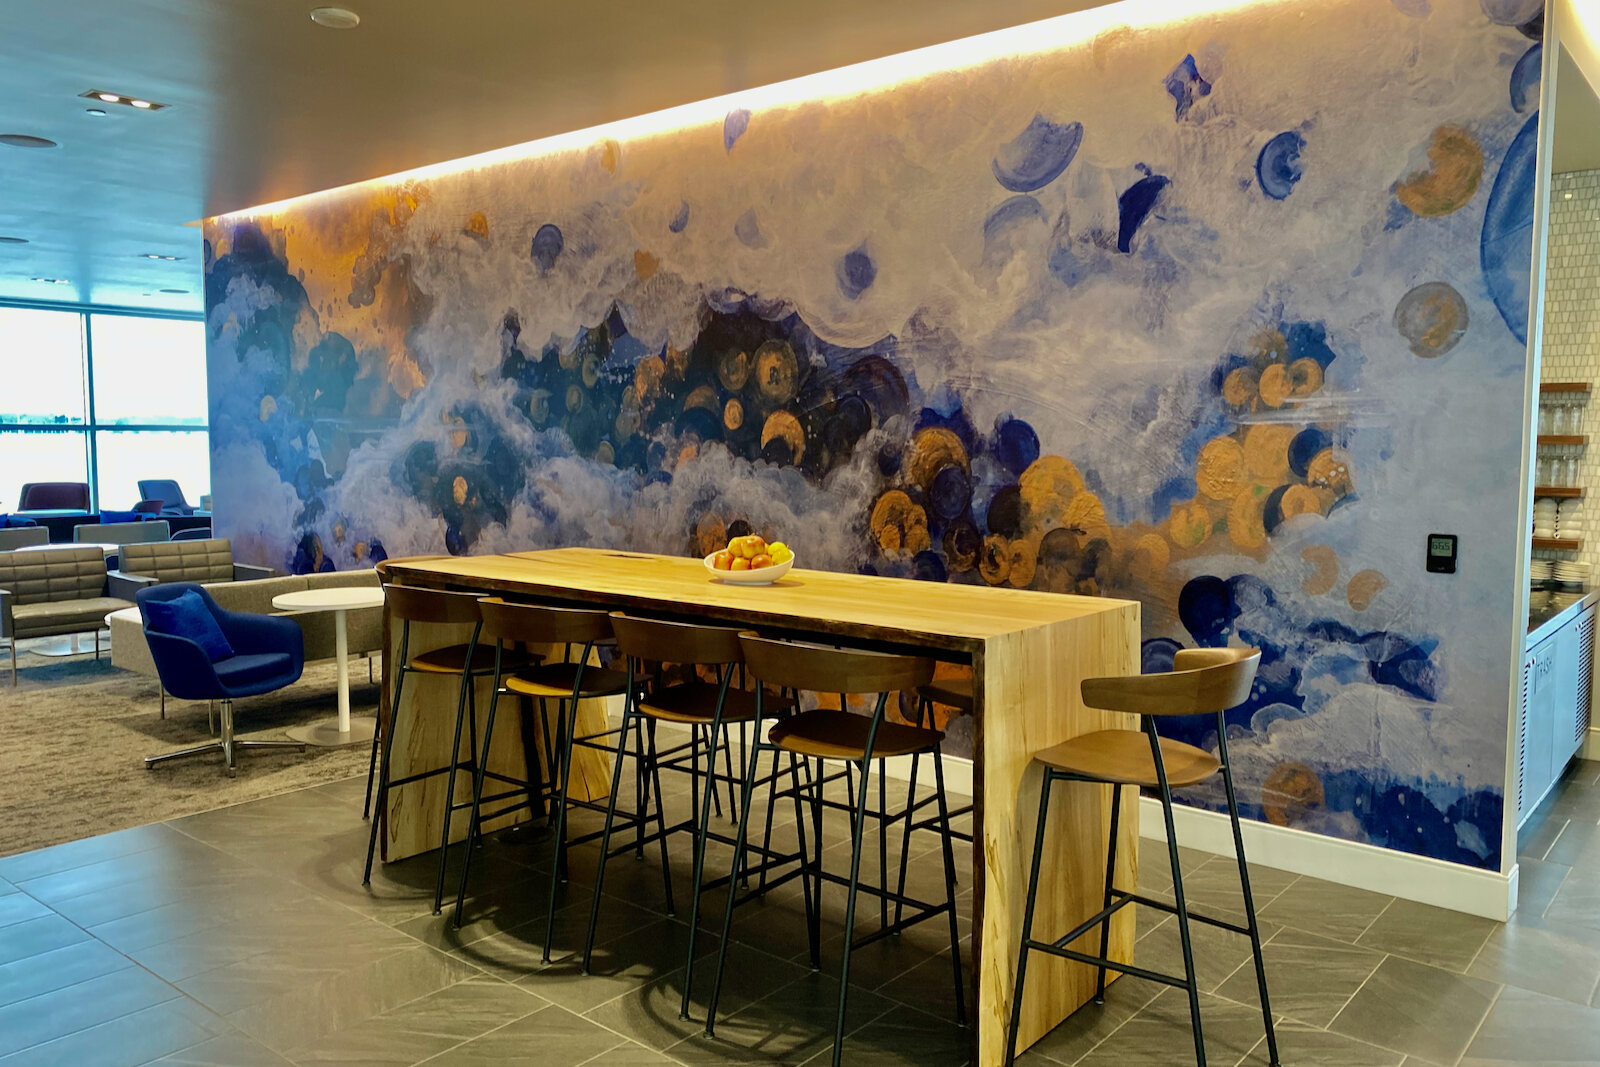 american express centurion lounge charlotte douglas airport wallpaper mural by artist amanda moody image by zach griff the points guy